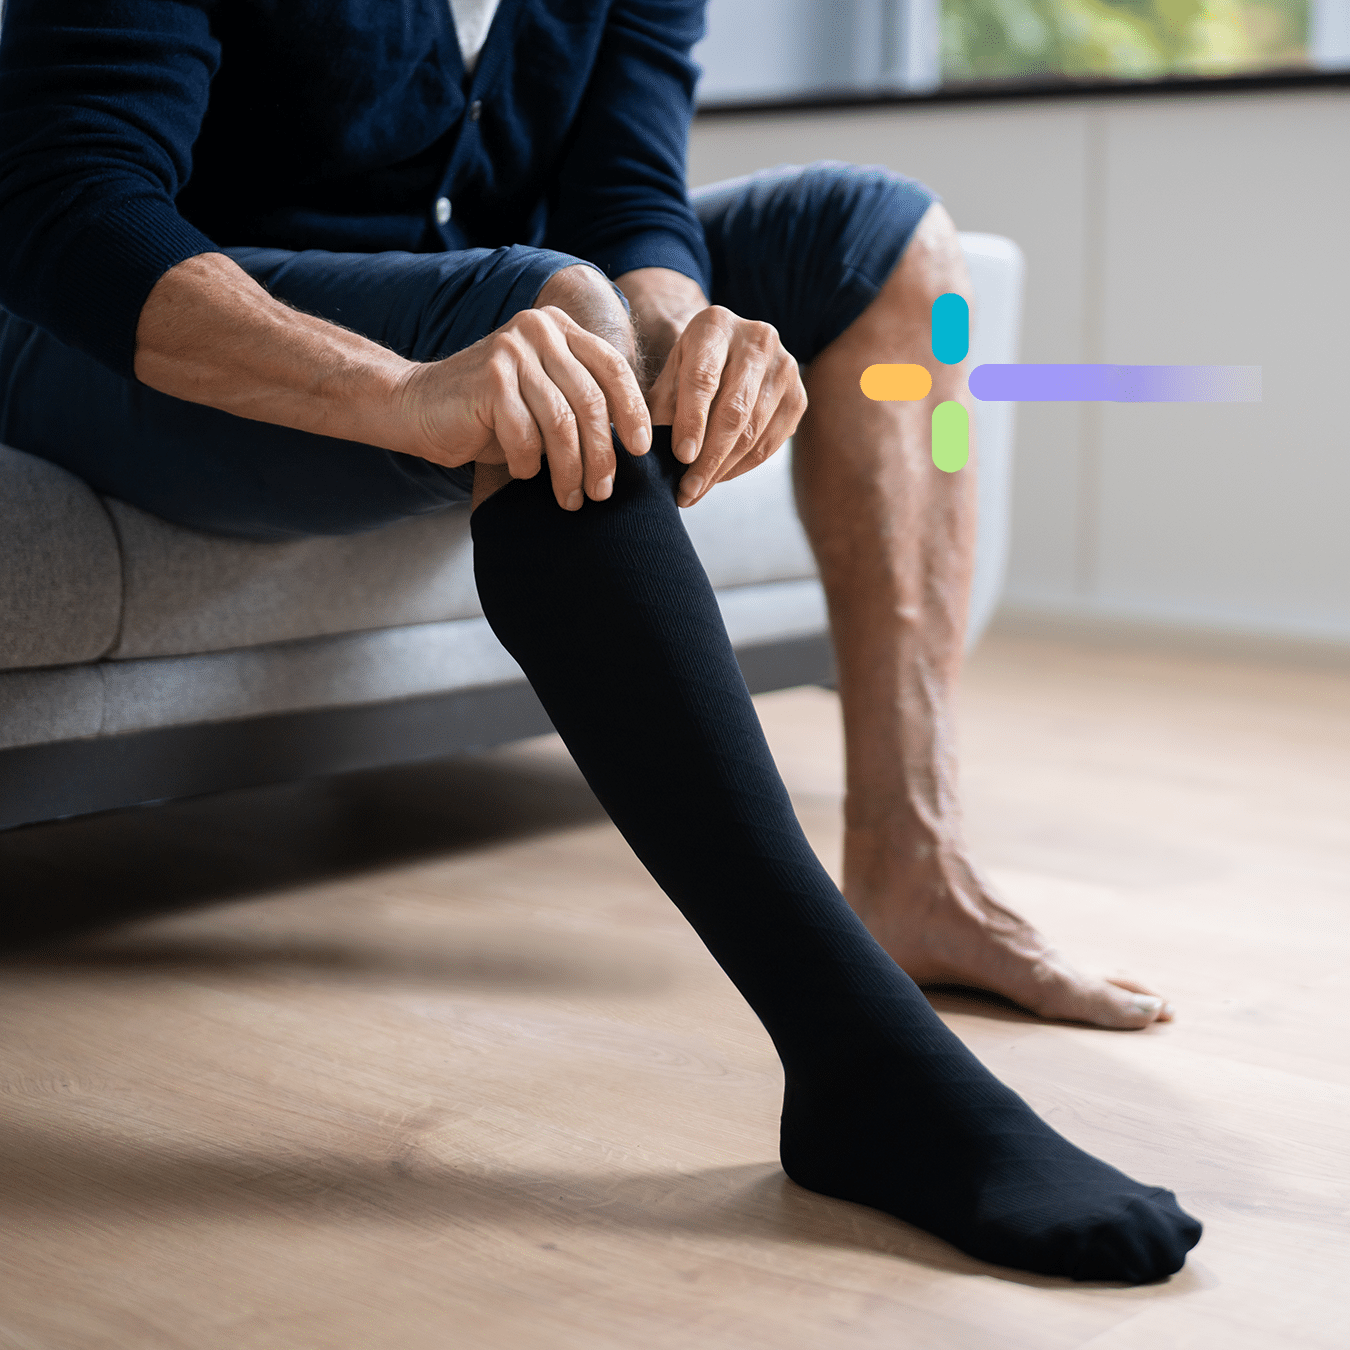 Tired, achy legs wanting relief? Try Compression Socks! - Well and